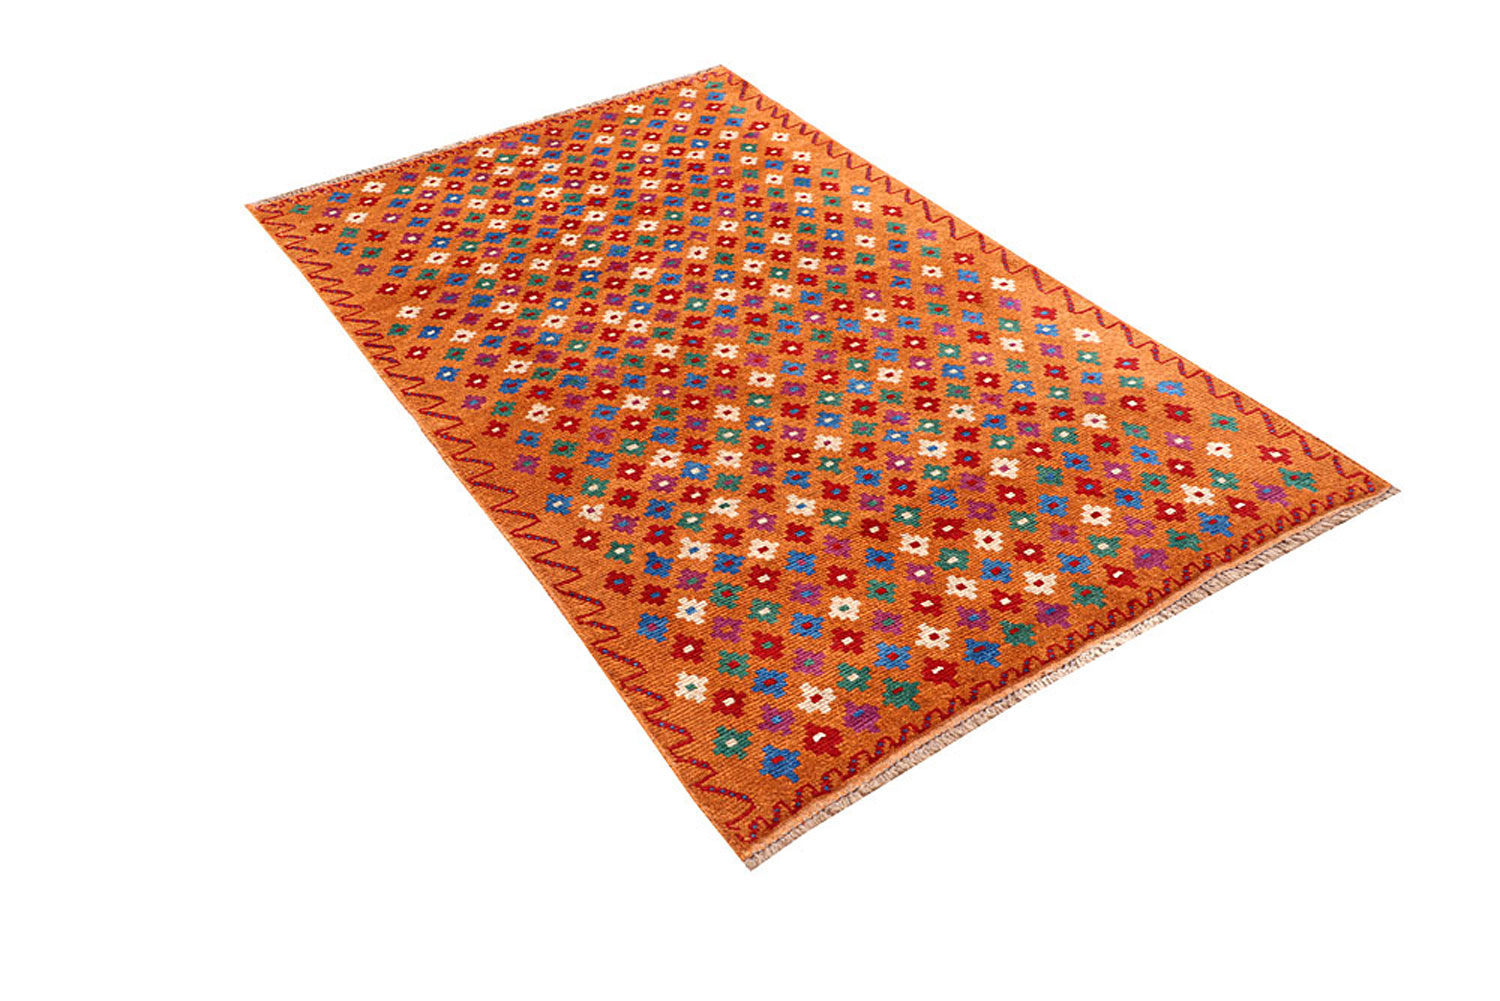 Best Rugs For Dogs That Pee